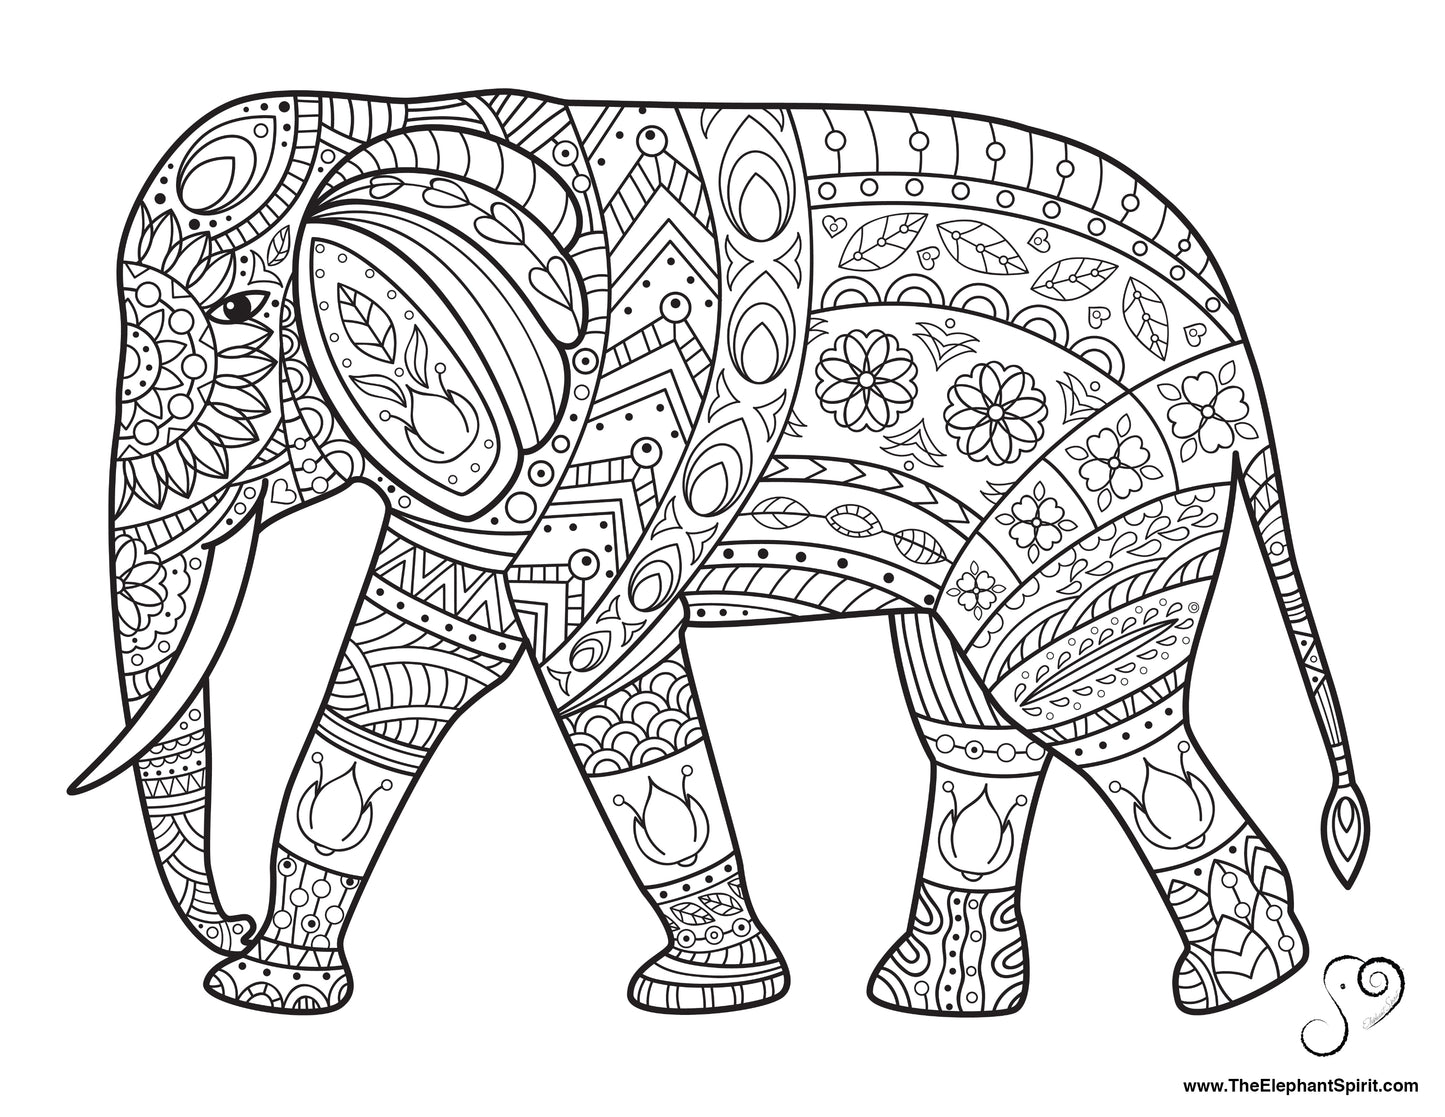 FREE Coloring Page 07-07